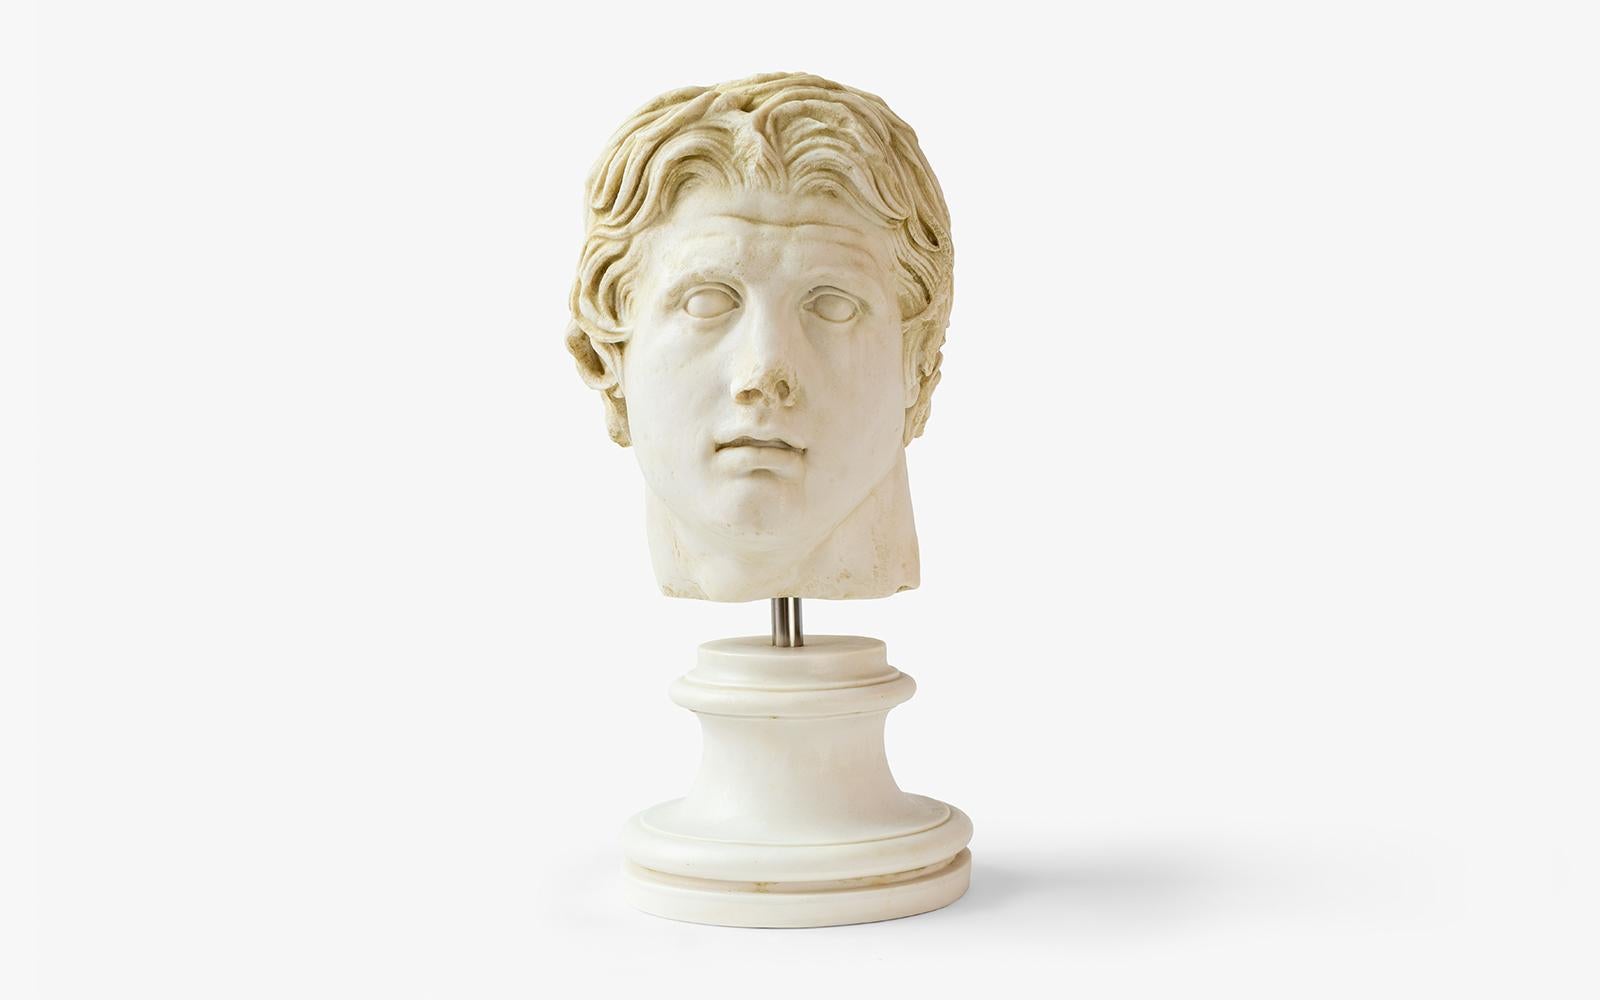 alexander the great last name